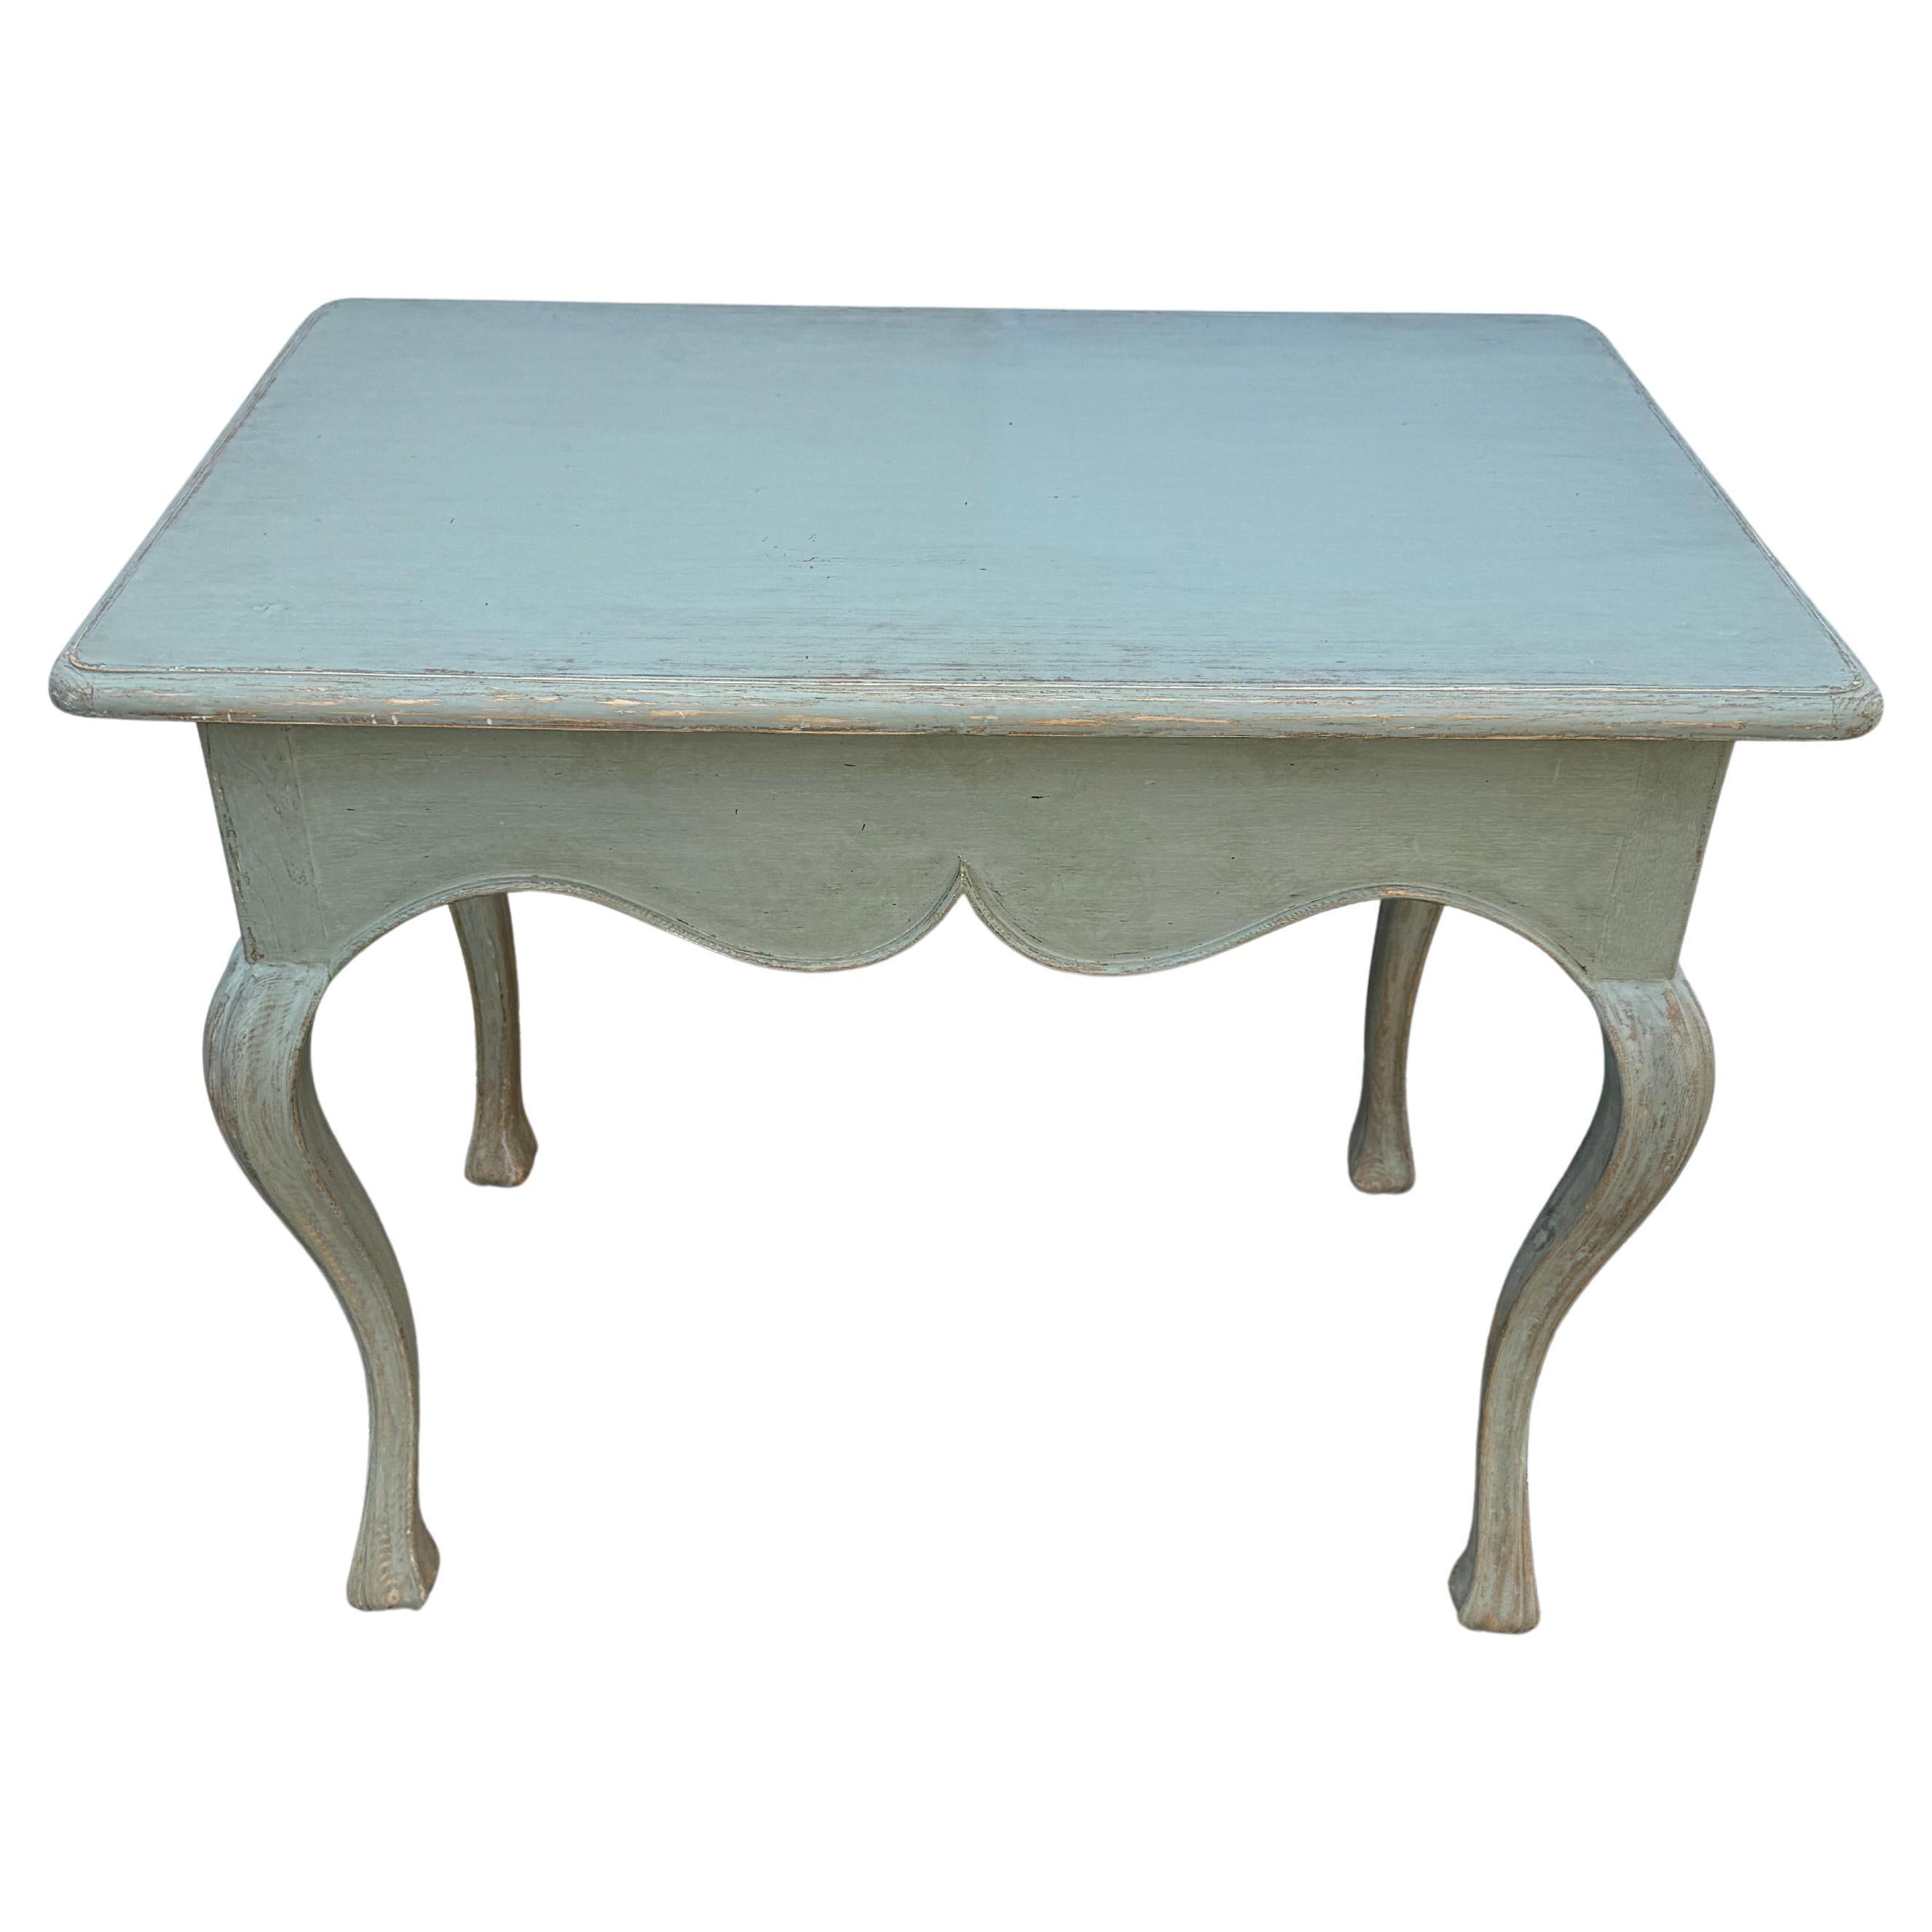 Hand Painted Hall, End or Occasional Table, Swedish Gustavian

Hand painted and hand distressed wood side table with cabriole legs in a muted Scandinavian green color. The clean lines and elegance of this piece of Gustavian furniture is equally at